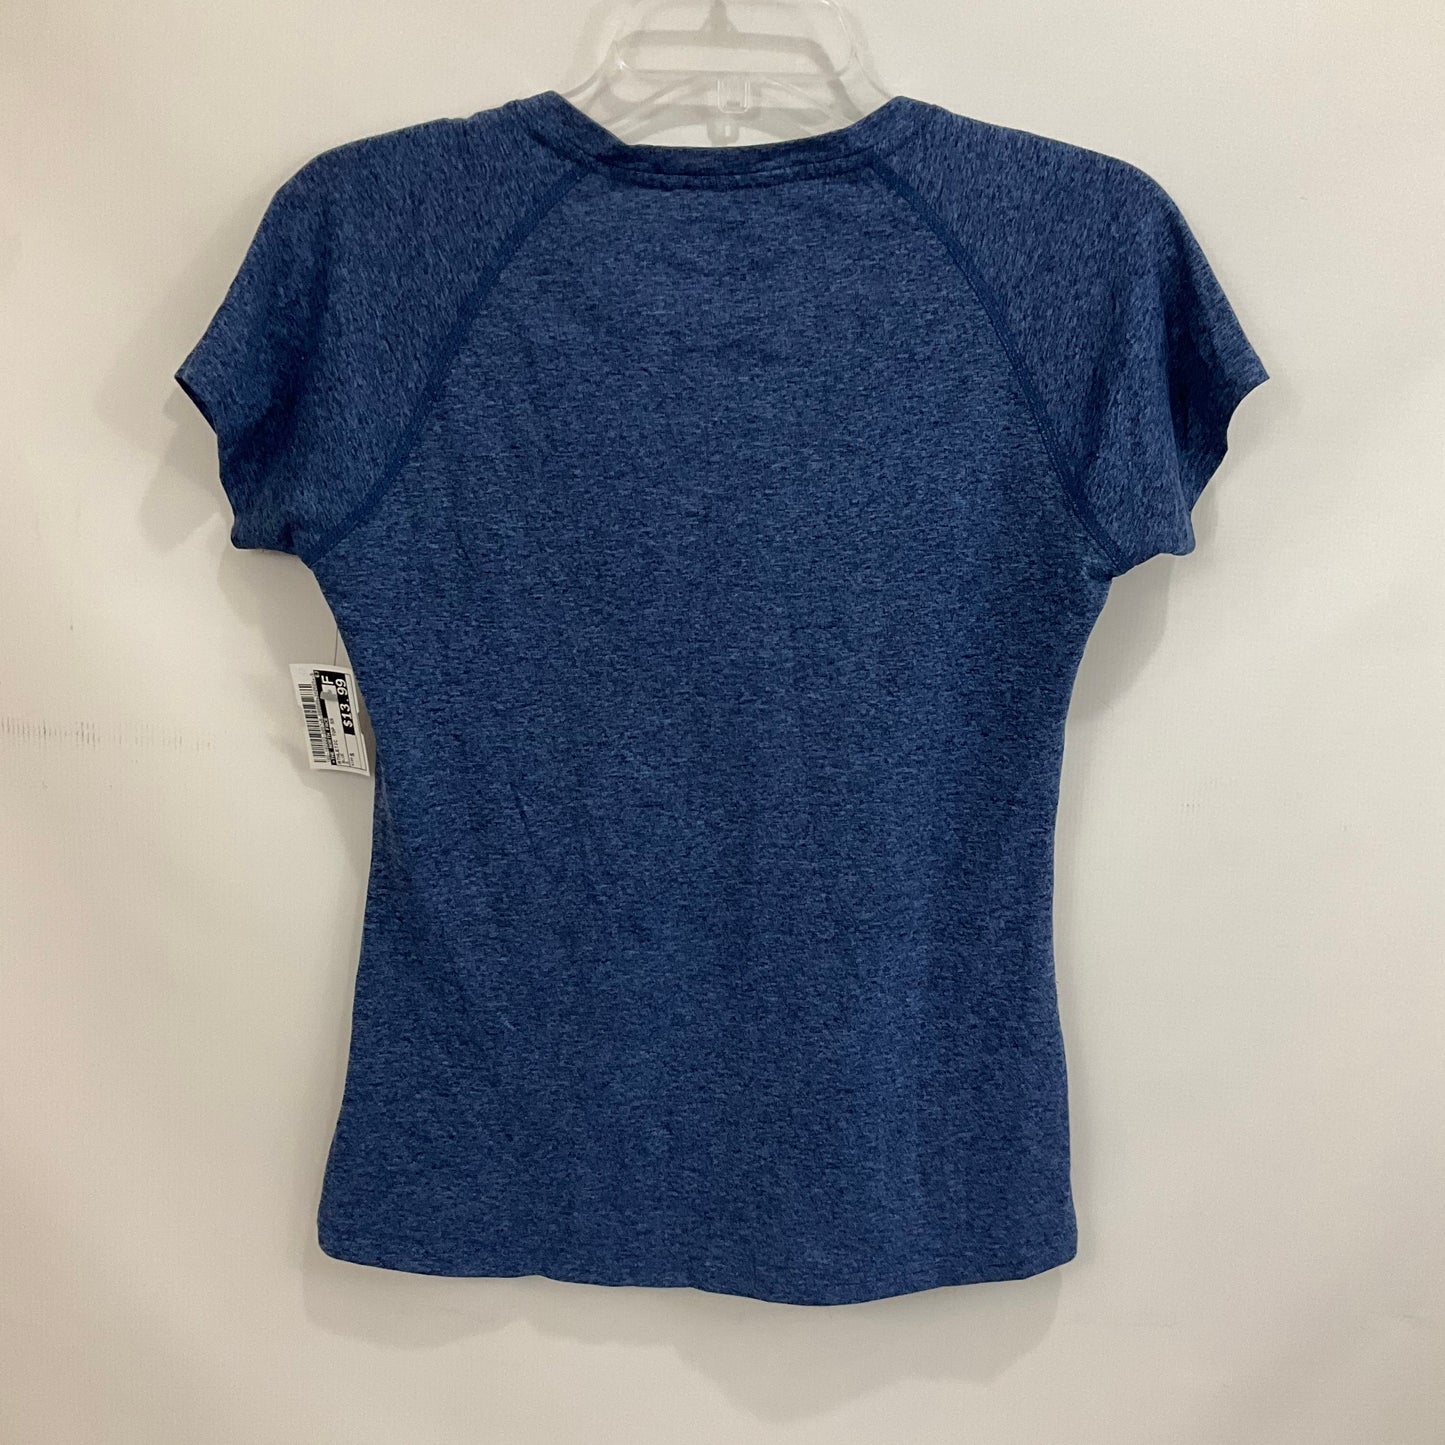 Blue Athletic Top Short Sleeve The North Face, Size S